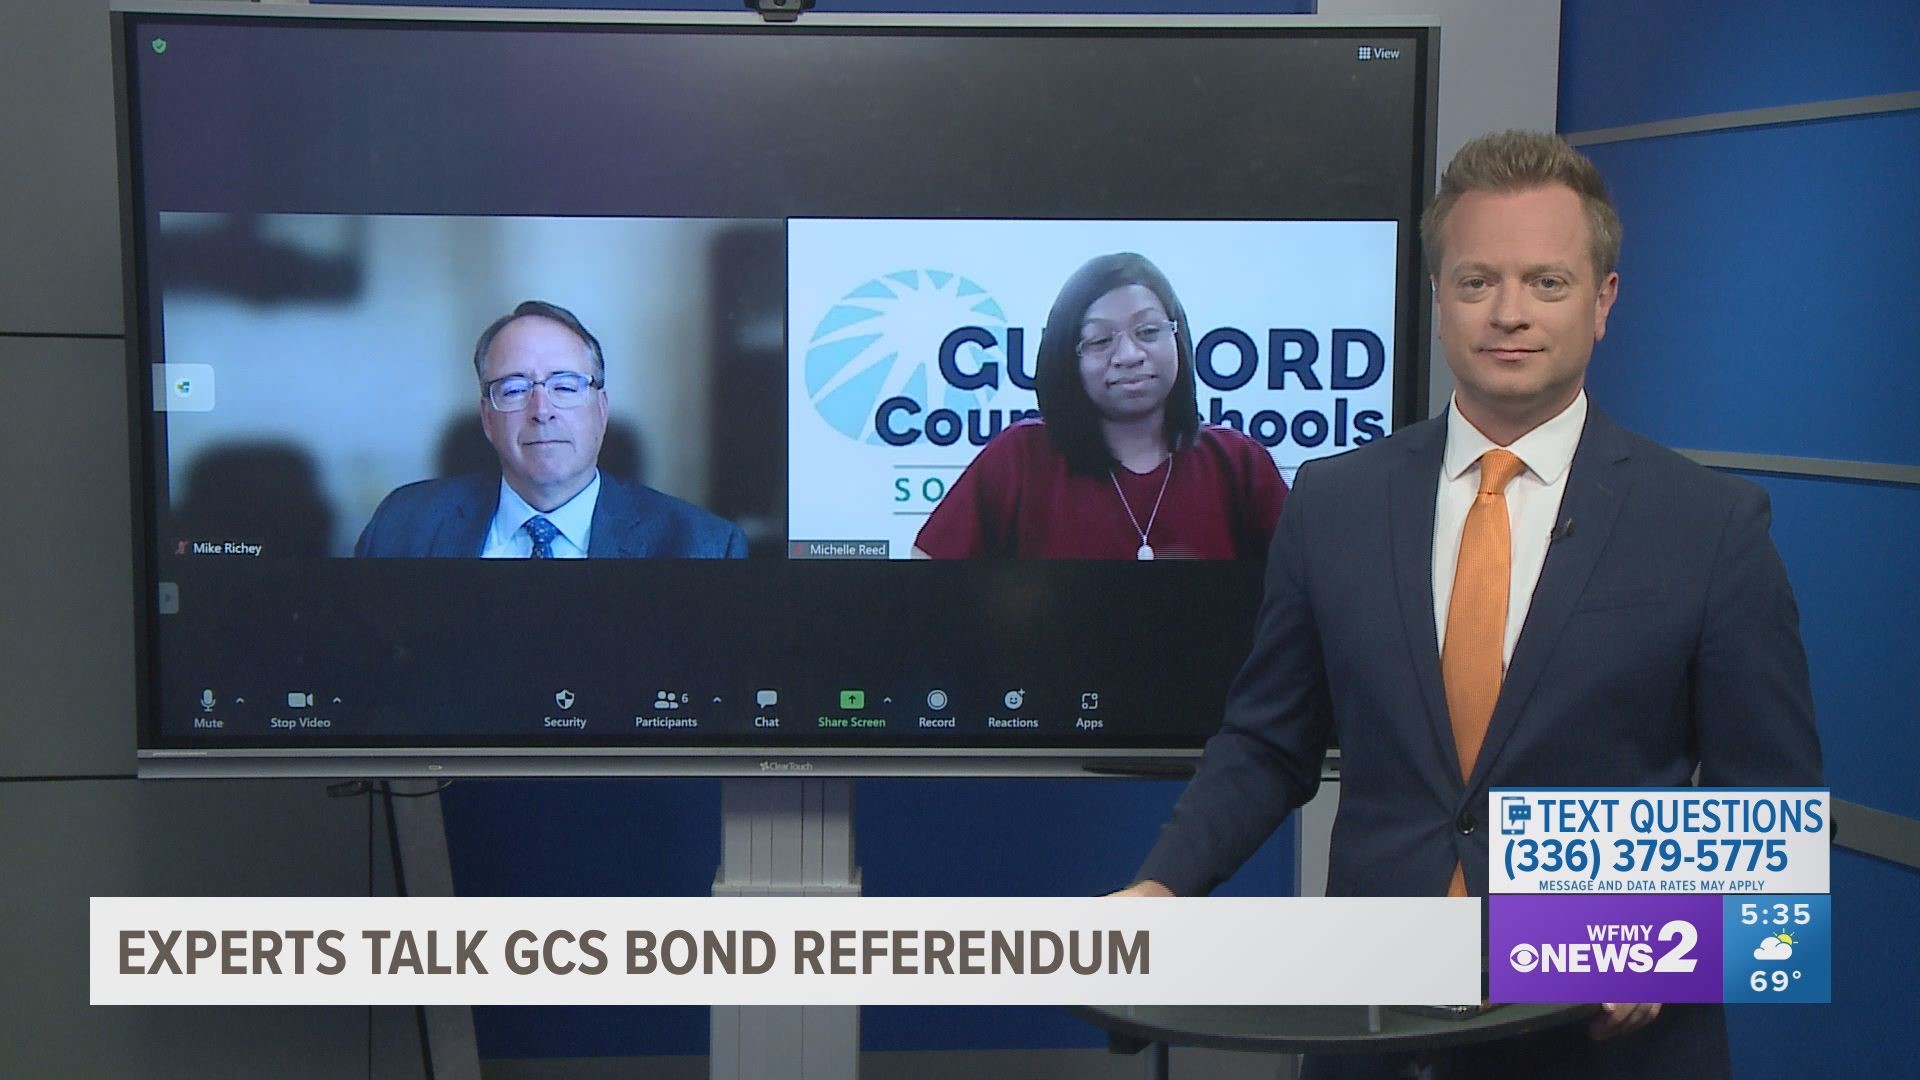 In the May 17 election, Guilford County residents can vote to approve a $1.7 billion bond that would make improvements, renovations to Guilford County Schools.